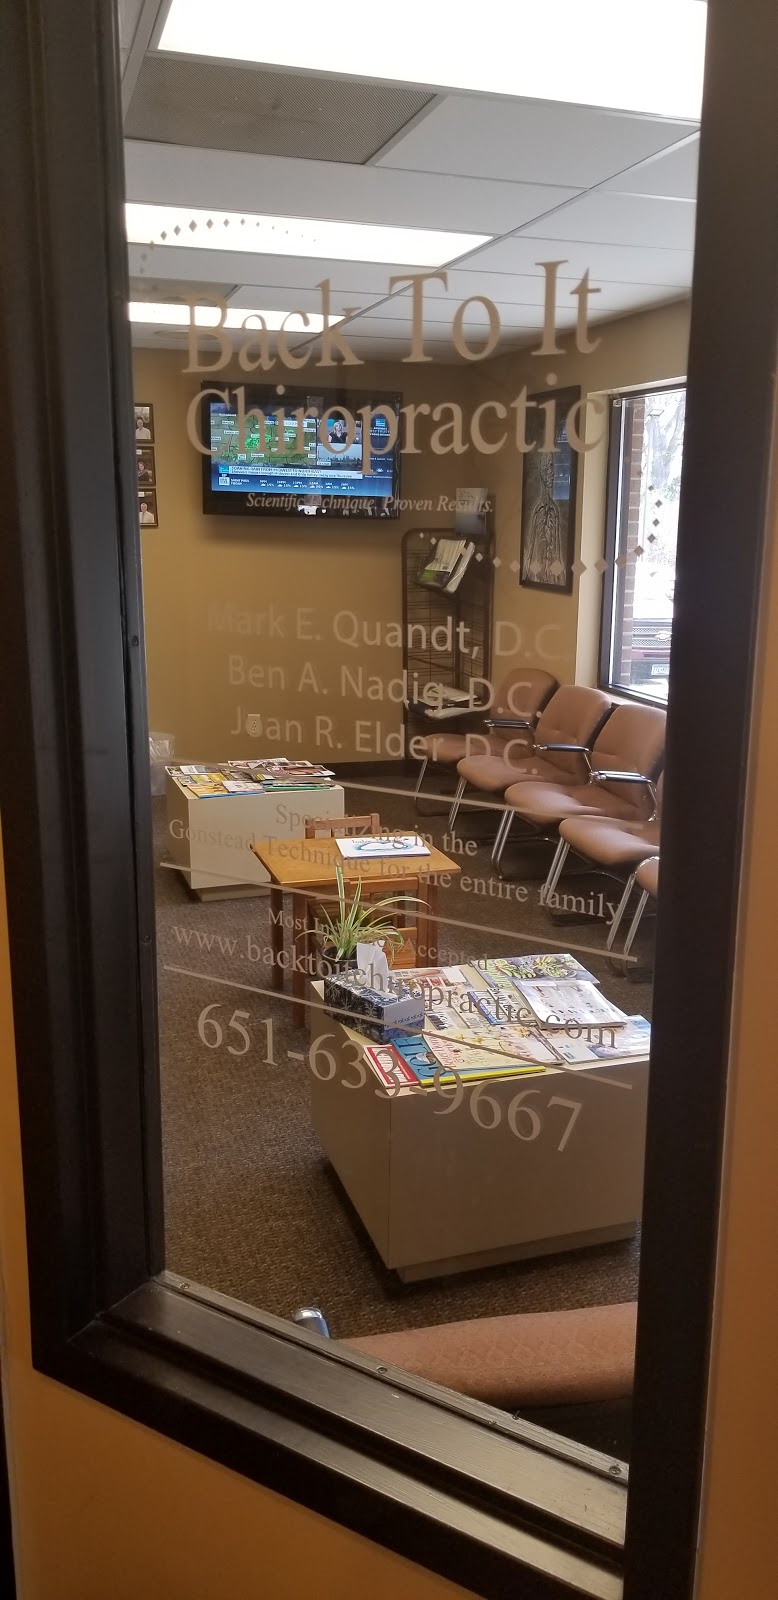 Back To It Chiropractic | 1260 County Rd E suite b, Arden Hills, MN 55112, USA | Phone: (651) 633-9667